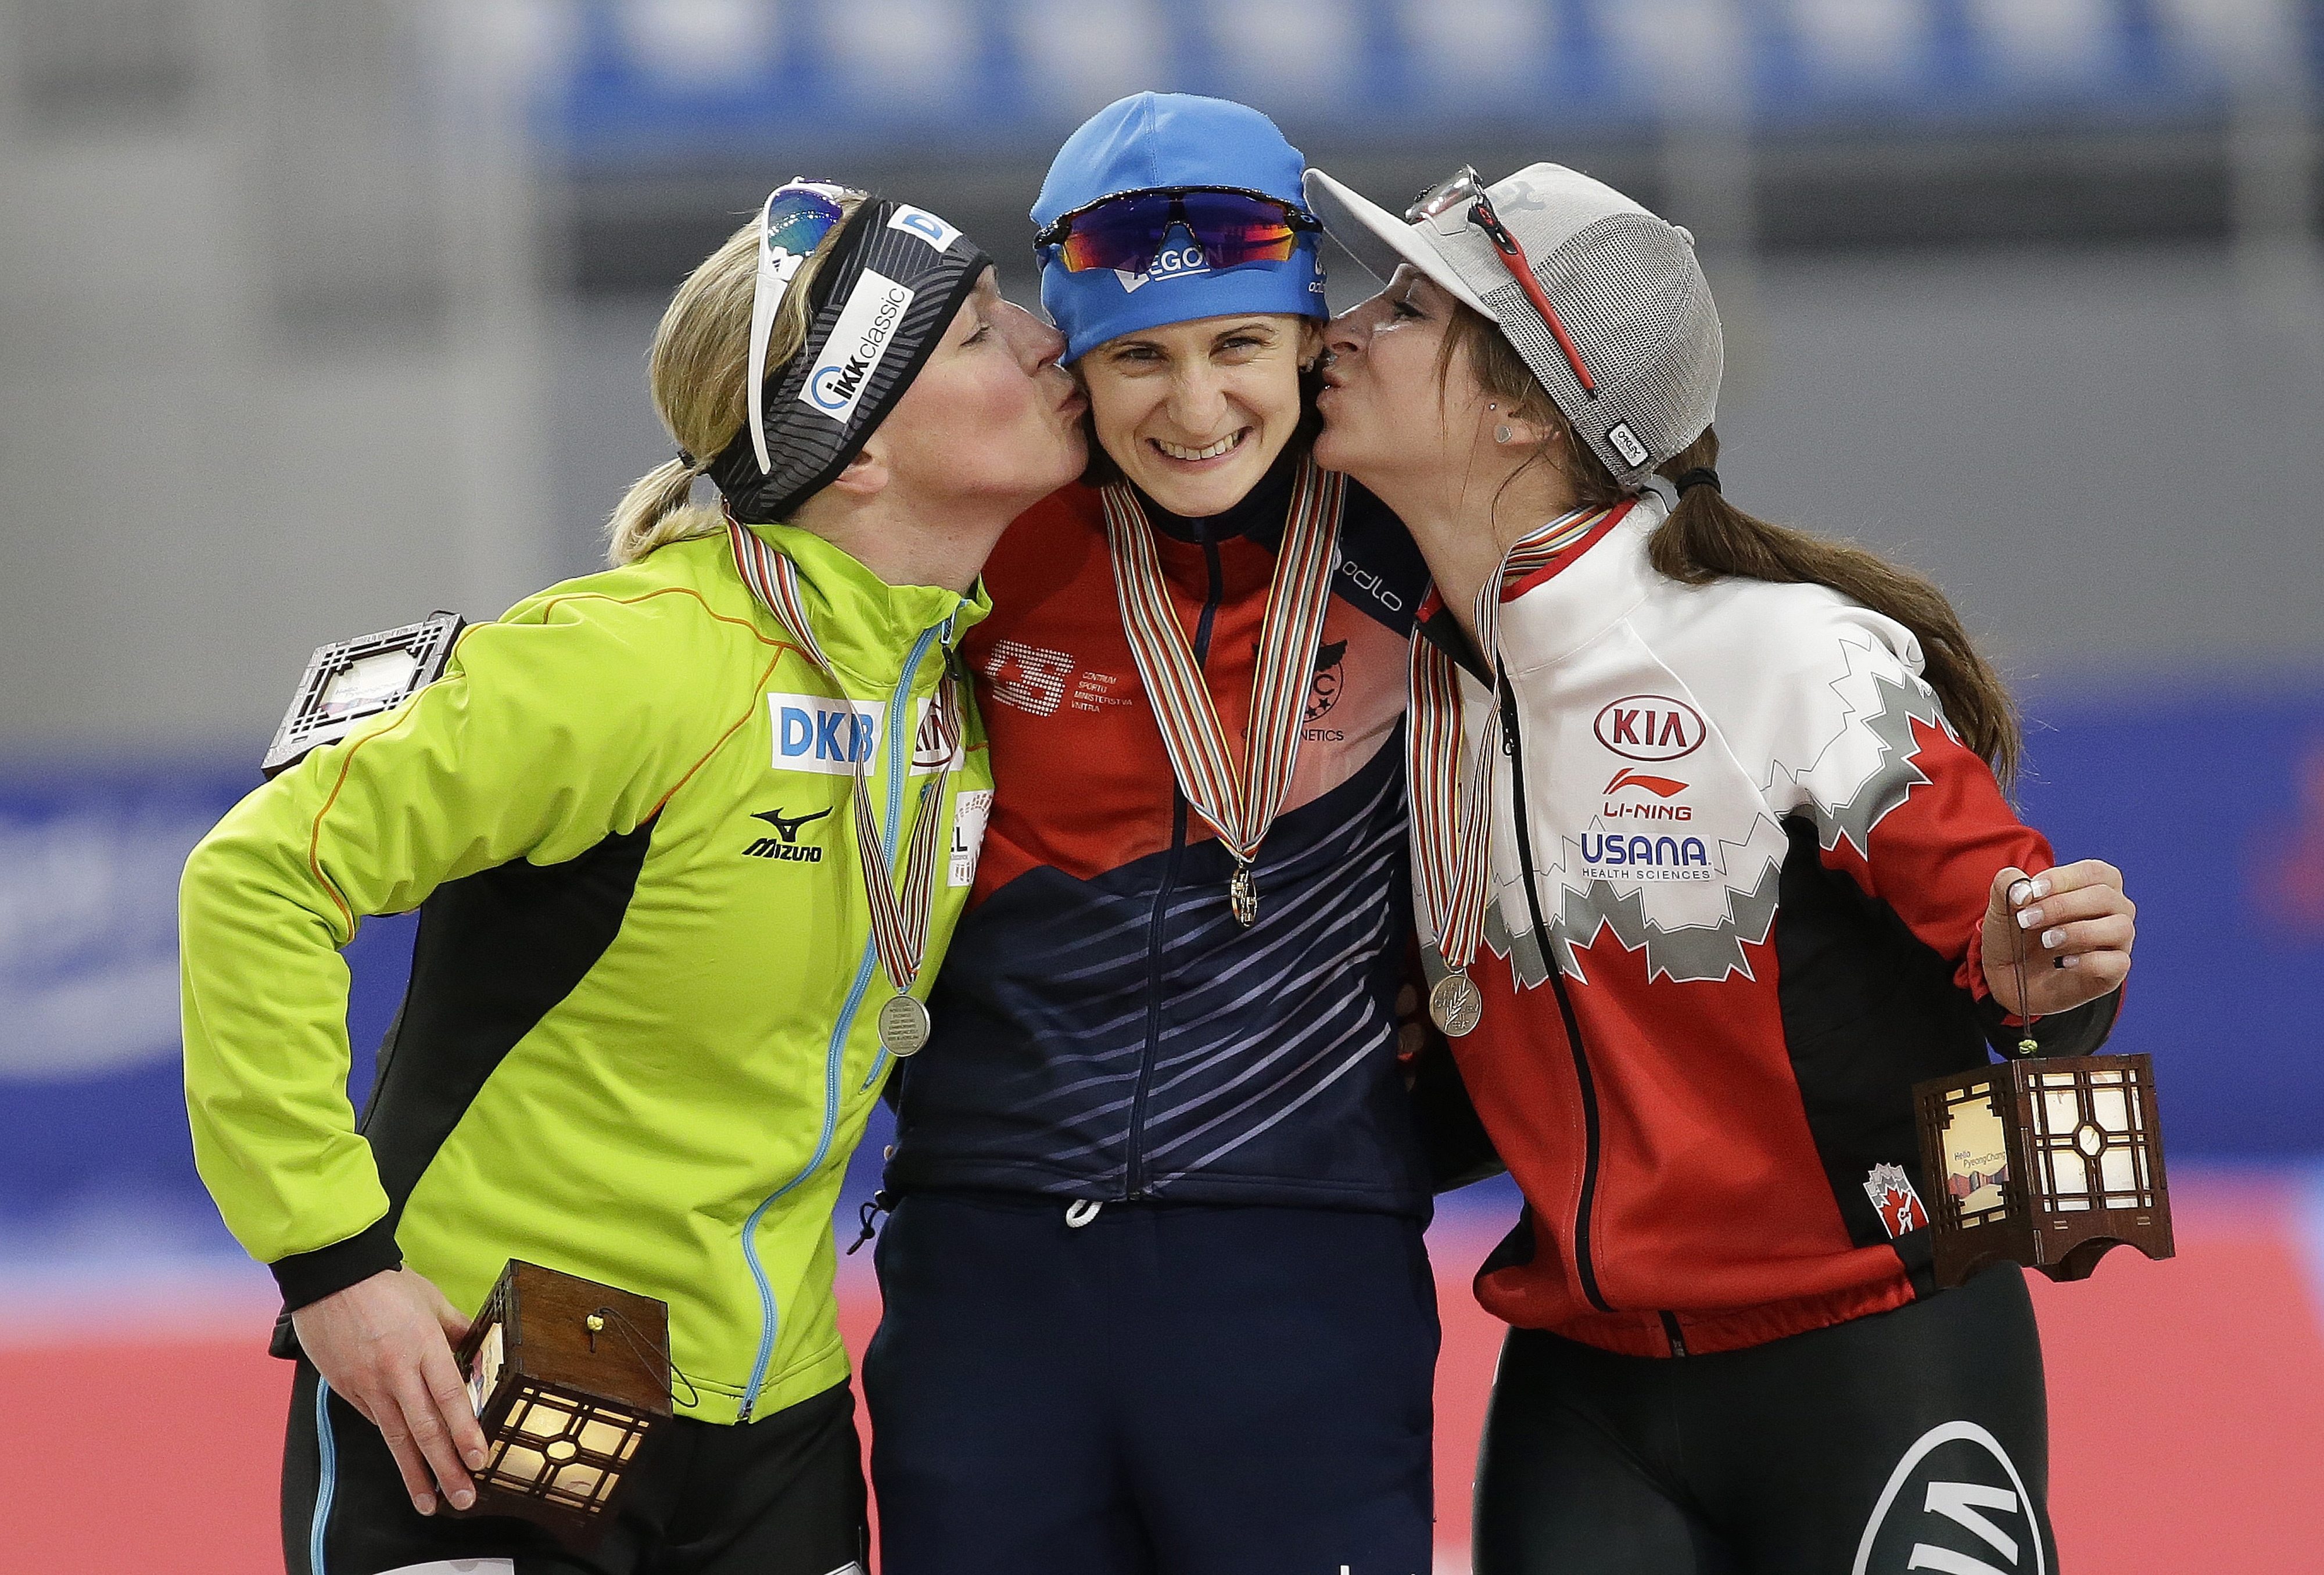 Winner Martina Sablikova of Czech Republic, center, is kissed by second placed Claudia Pechstein of Germany and third placed Ivanie Blondin, right, of Canada during the victory ceremony of the women's 5000 meter race of the ISU world single distances speed skating championships at Gangneung Oval in Gangneung, South Korea, Saturday, Feb. 11, 2017. The world cup competition is also a test event for the upcoming Pyeongchang 2018 Winter Olympics. (AP Photo/Ahn Young-joon)